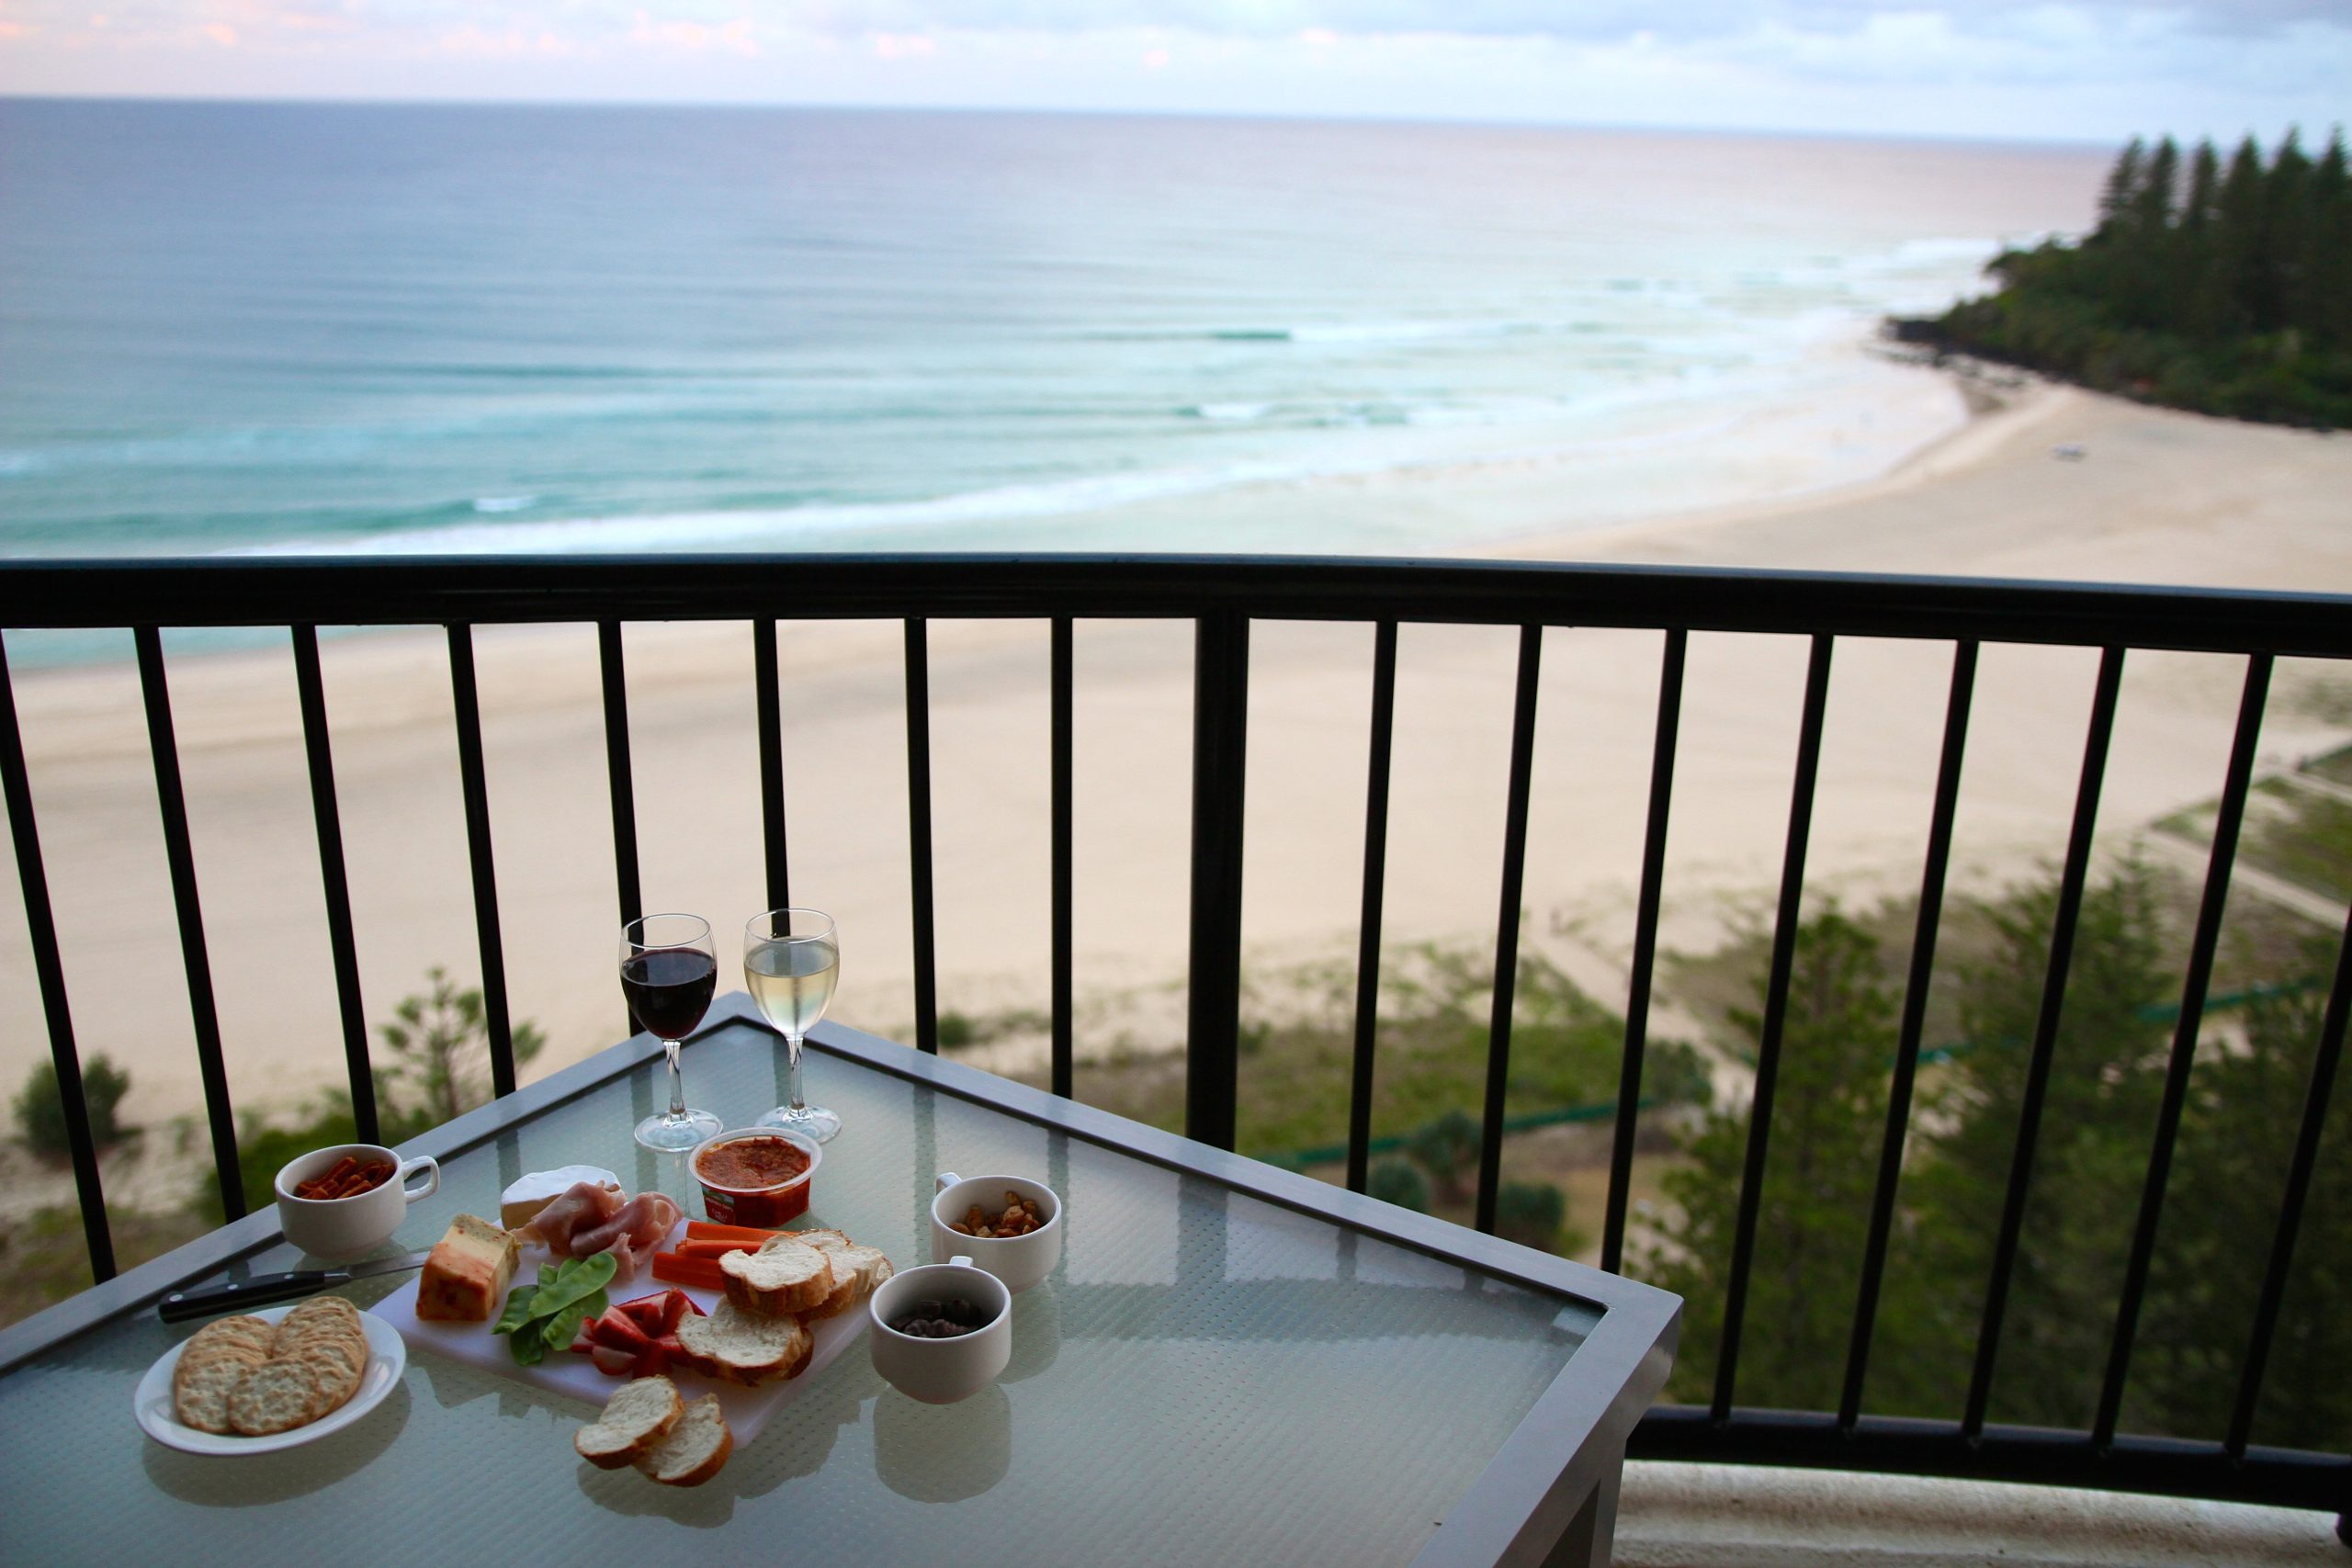 Cheese platter and view